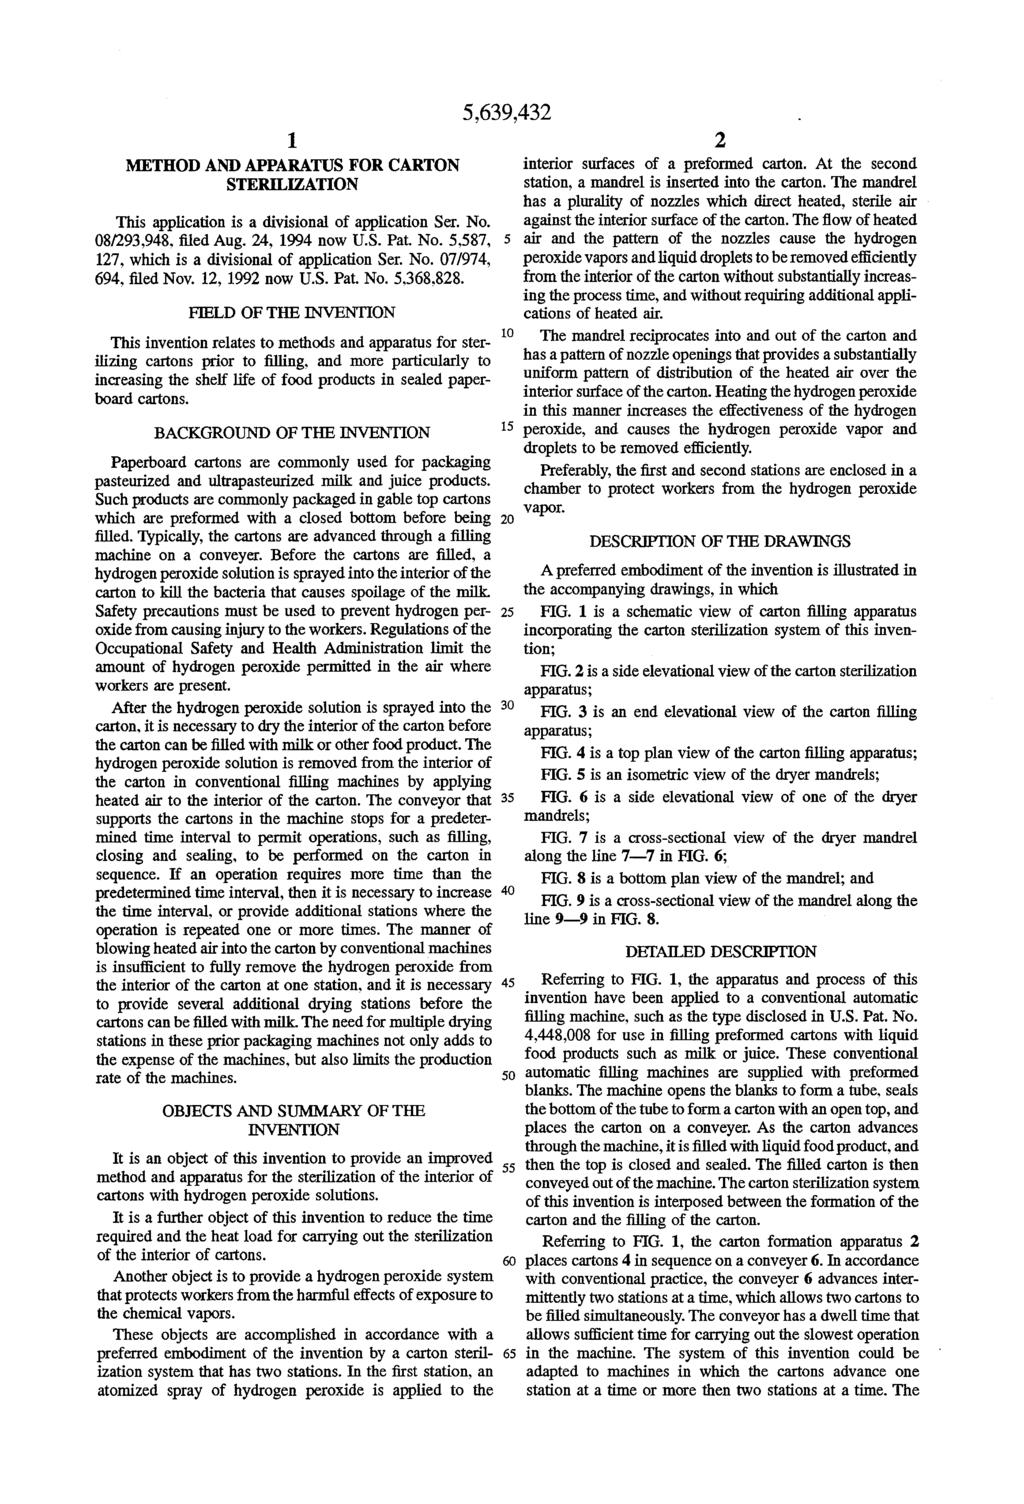 1. METHOD AND APPARATUS FOR CARTON STERILIZATION This application is a divisional of application Ser. No. 08/293.948, filed Aug. 24, 1994 now U.S. Pat. No. 5,587, 127, which is a divisional of application Ser.